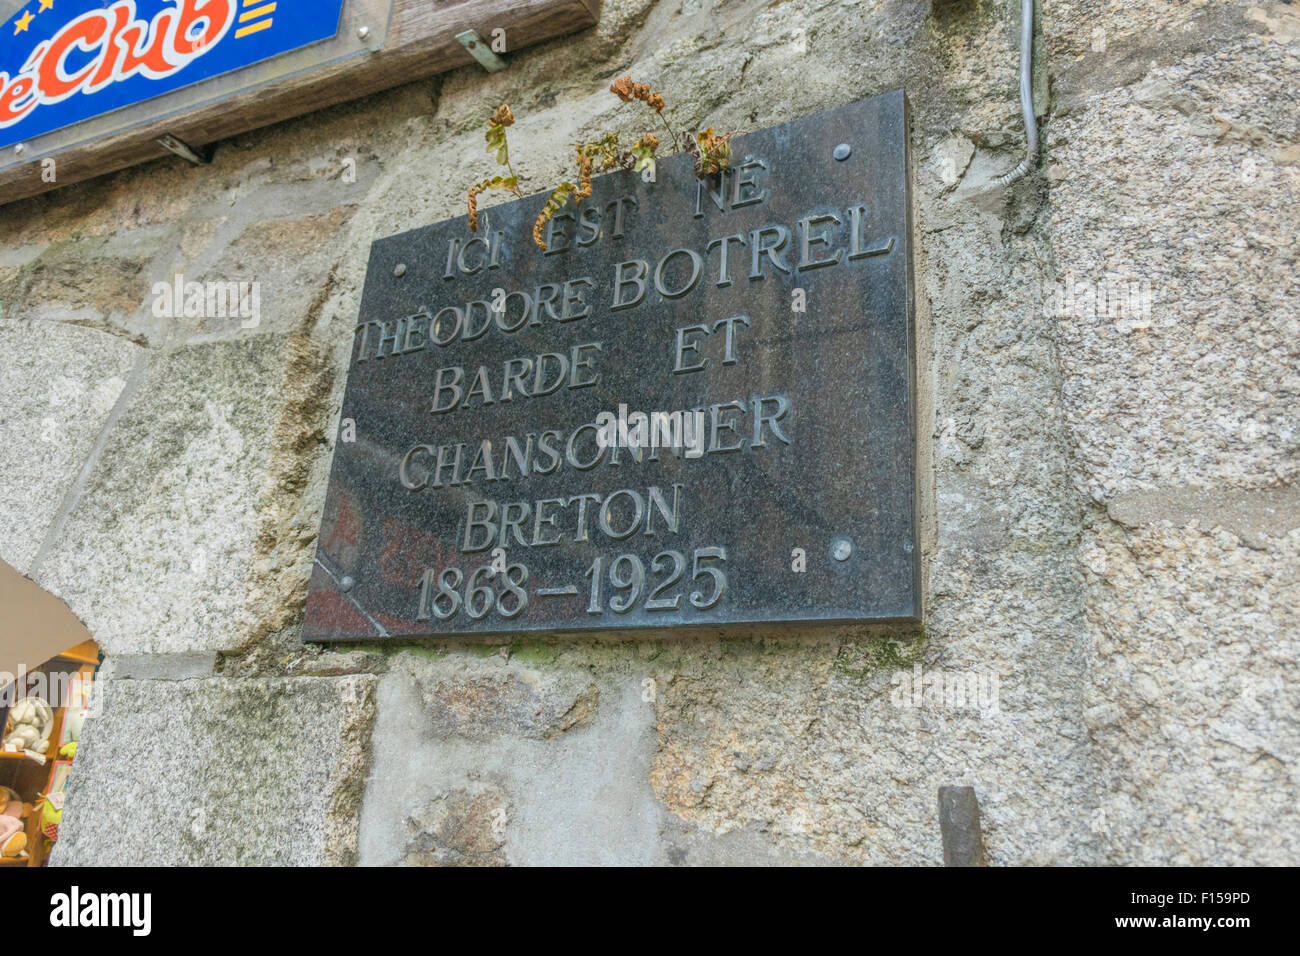 Birthplace of Theodore Botrel, During World War I he became France's official 'Bard of the Armies'. Dinan in Northwest France July 2015 PHILLIP ROBERT Stock Photo